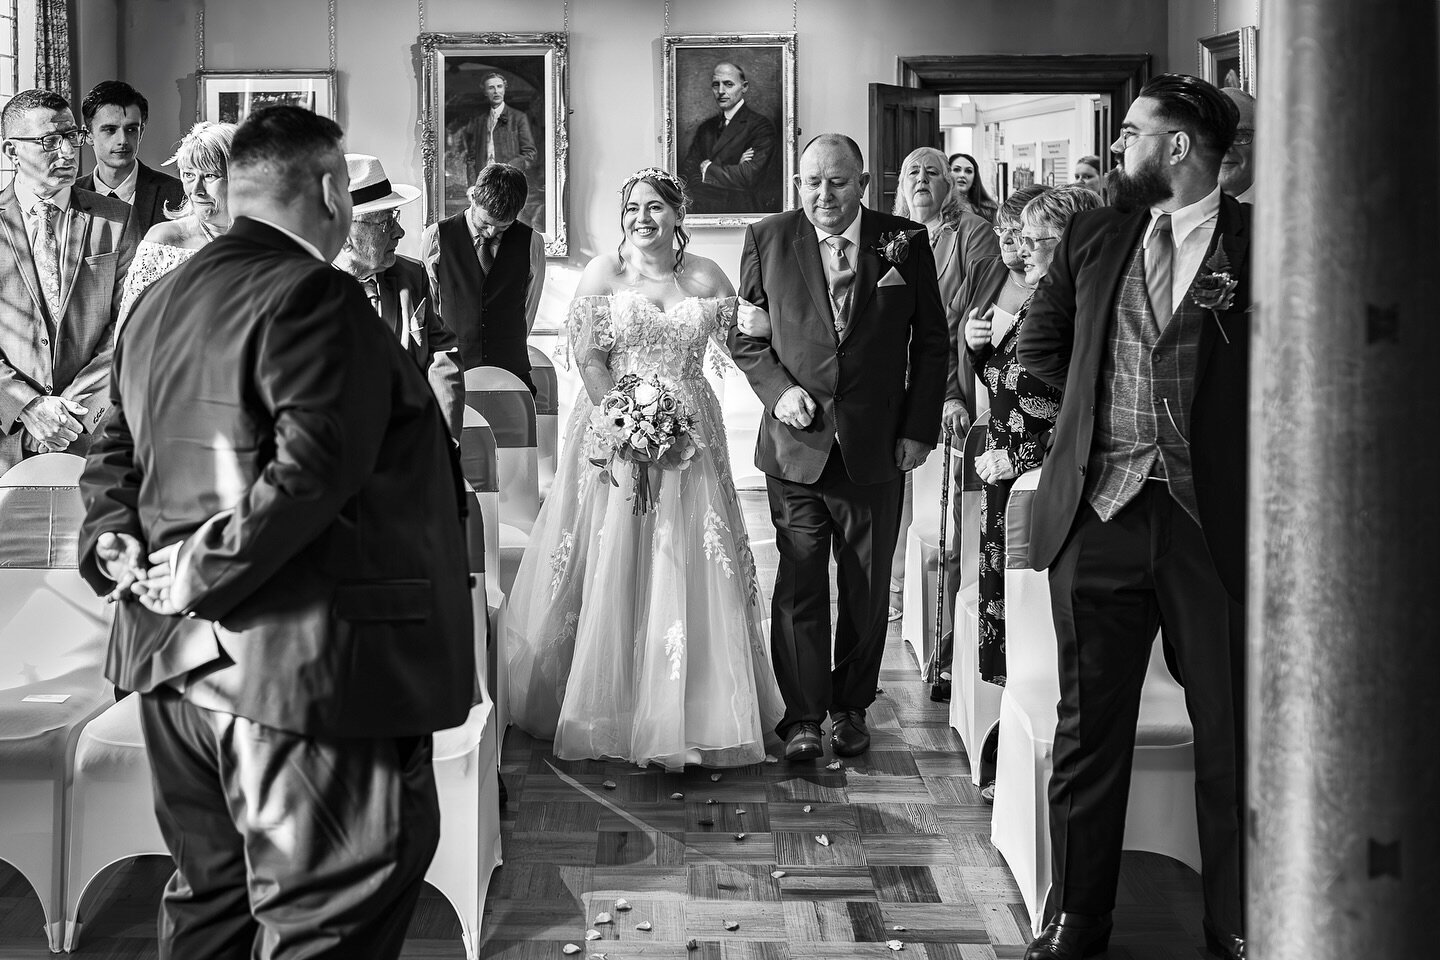 WEDDING TIP
WALKING DOWN THE AISLE 

How to have the best photos walking down the aisle:

1. SLOW DOWN AND ENJOY THE MOMENT: 
Take your time with each step, allowing yourself to soak in the emotions and atmosphere of this special occasion. A slower p